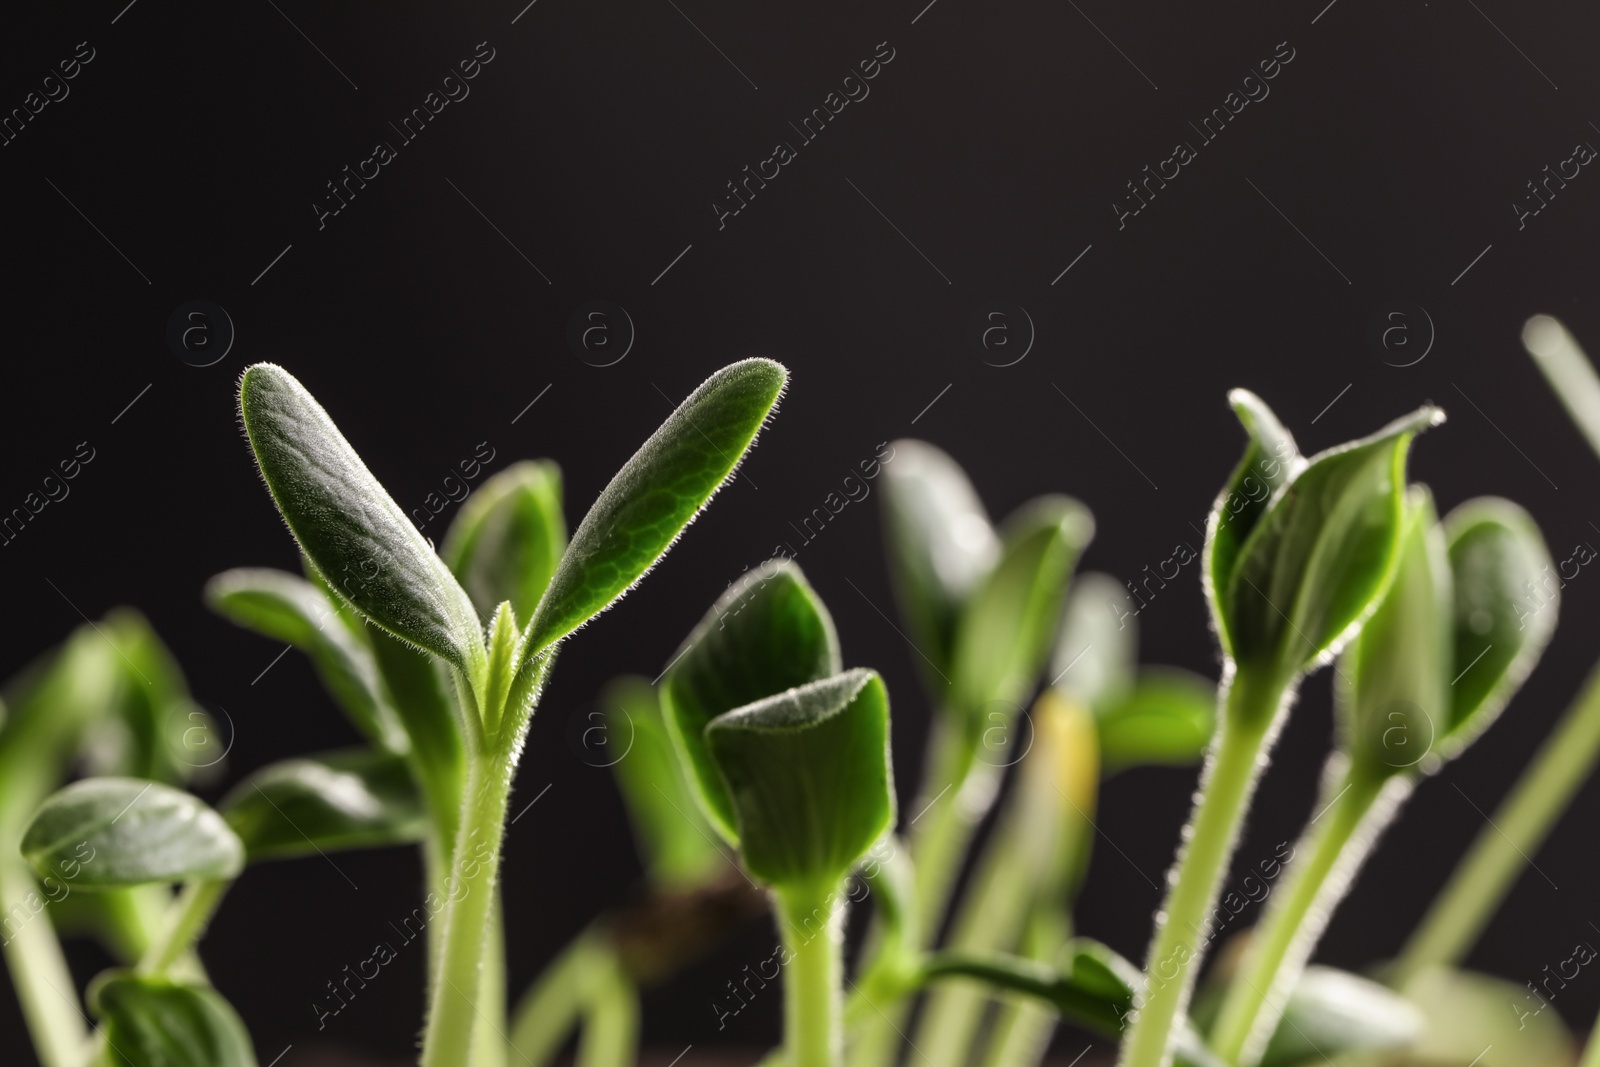 Photo of Little green seedlings growing against black background, closeup view